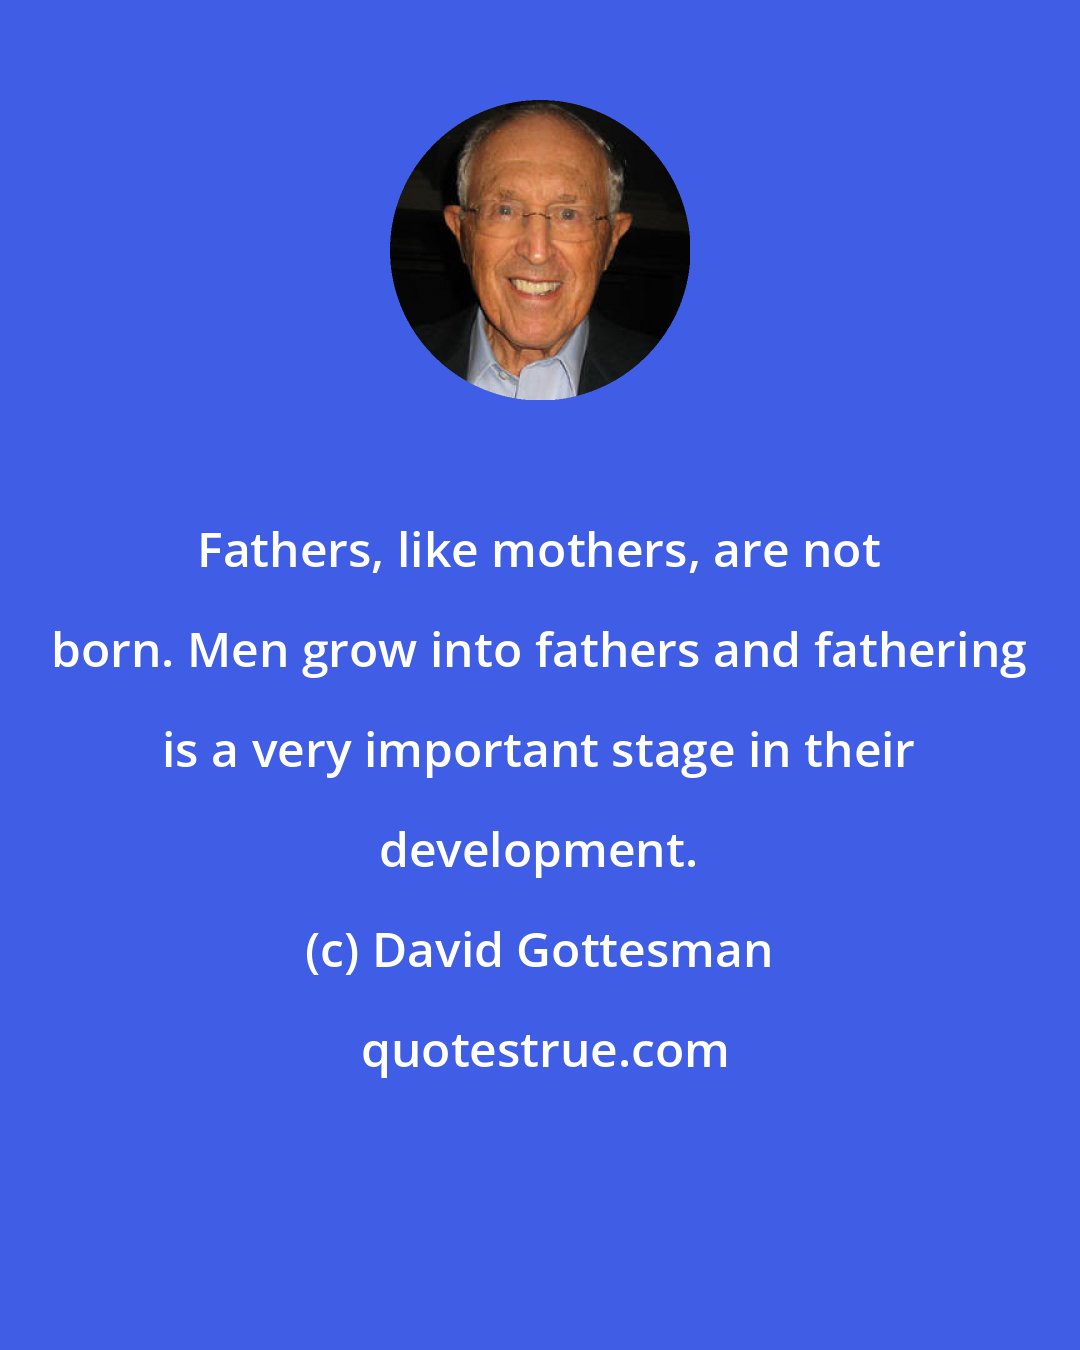 David Gottesman: Fathers, like mothers, are not born. Men grow into fathers and fathering is a very important stage in their development.